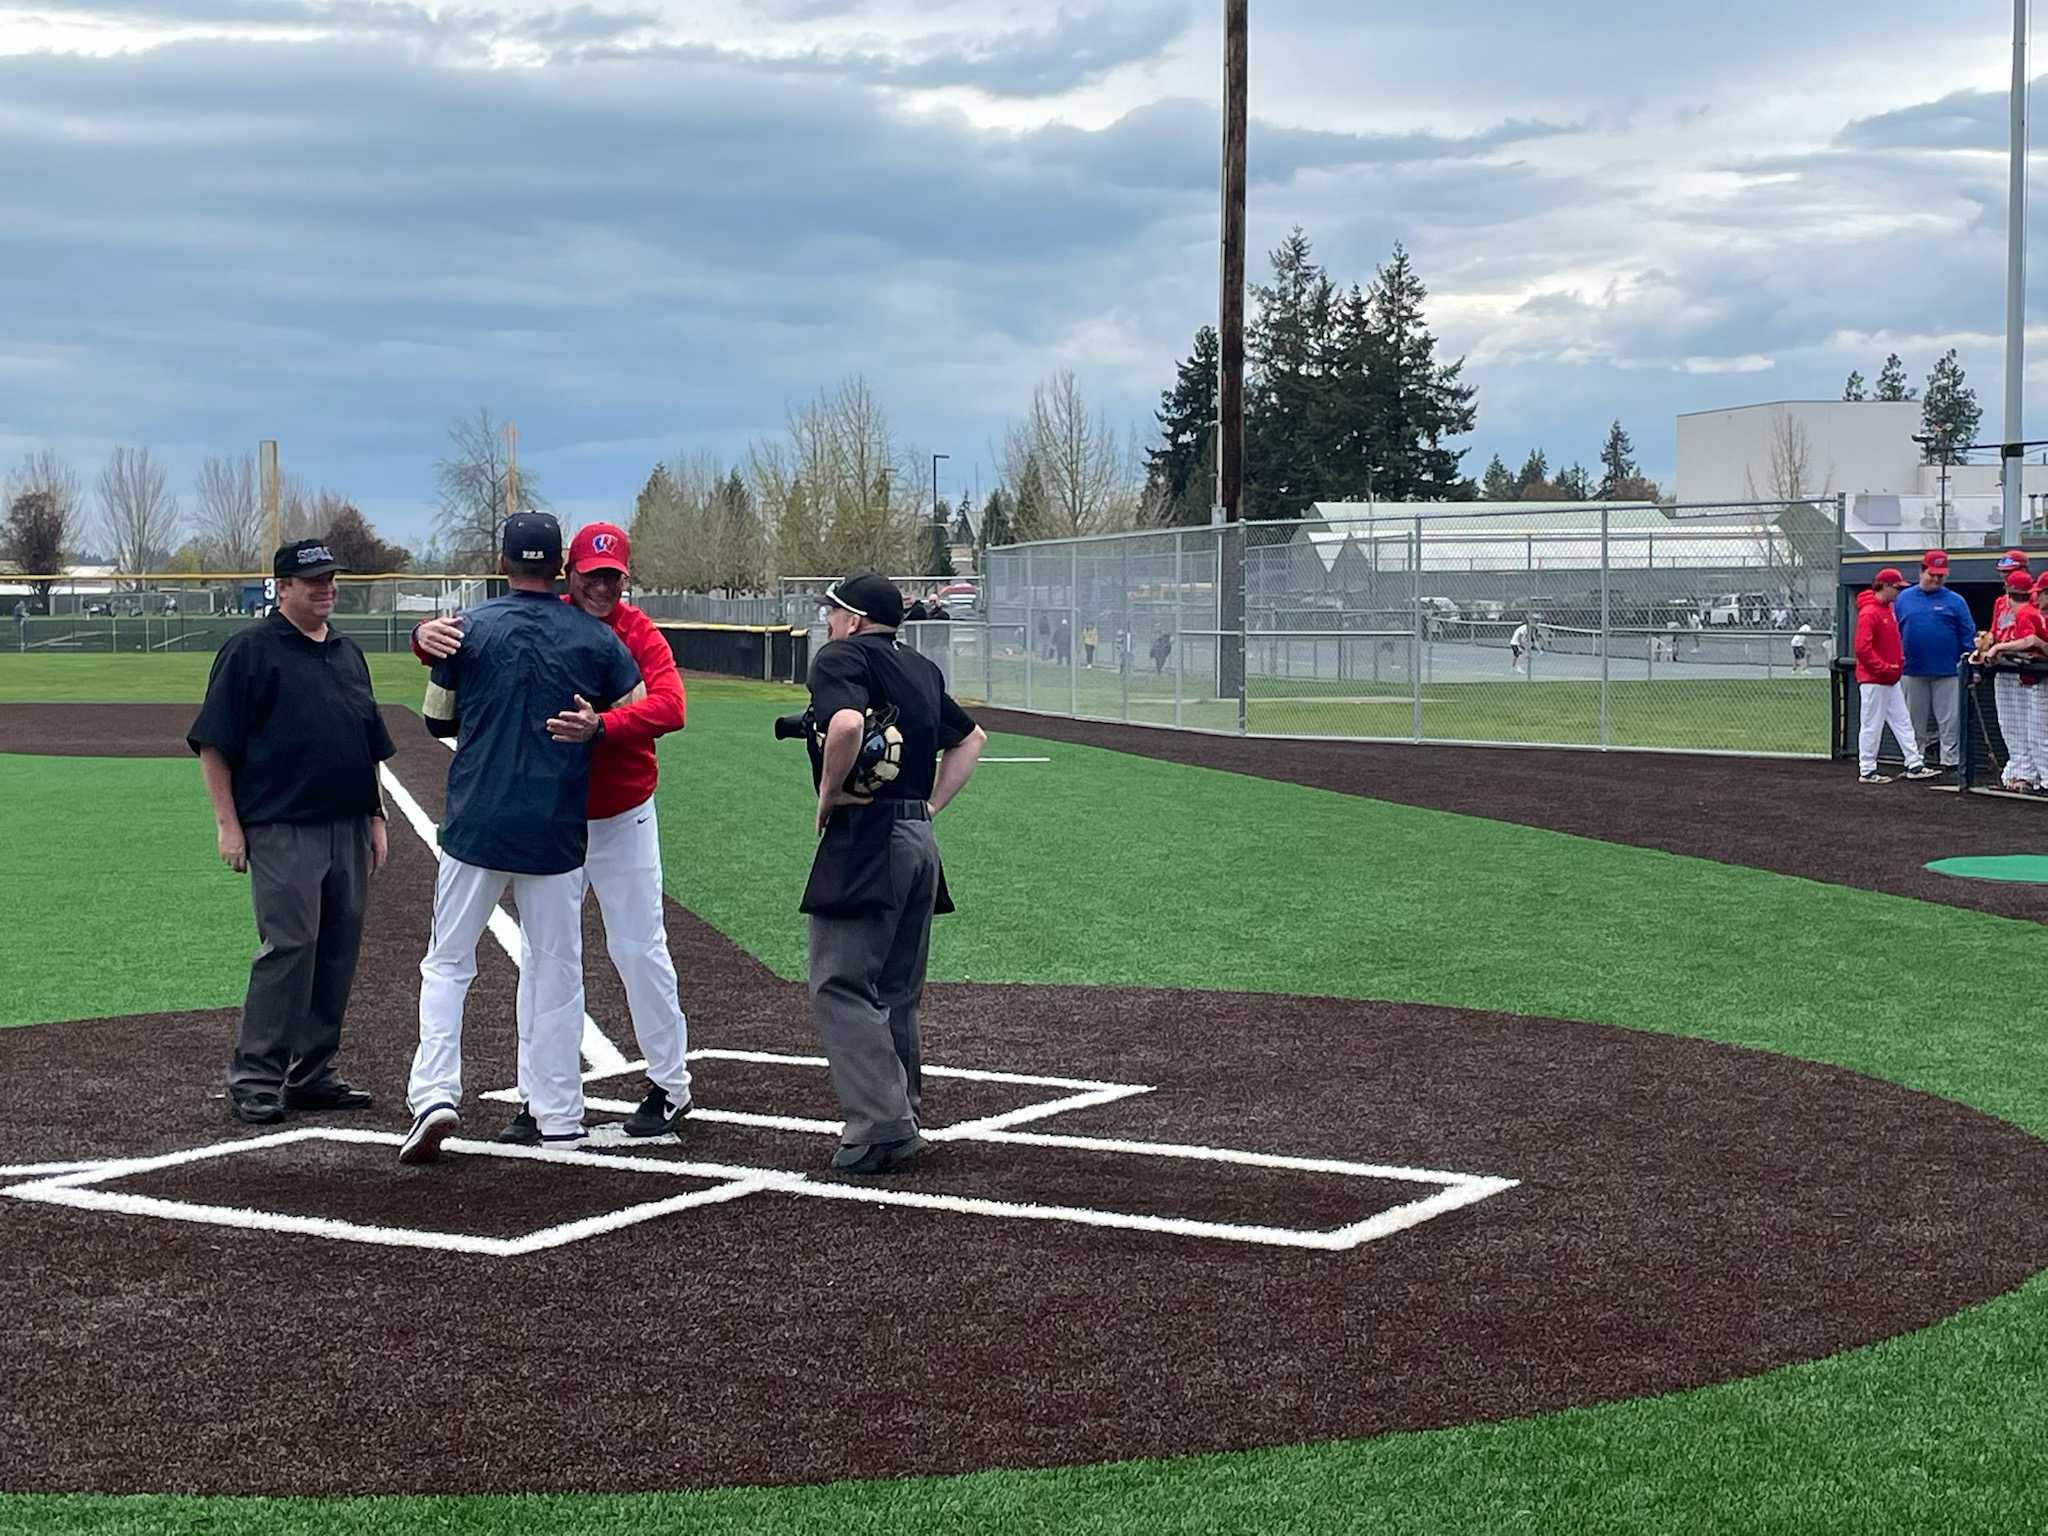 Lebanon coach Jeff Stolsig (in red) embraces son J.J., the coach at Canby, before a game earlier this year.